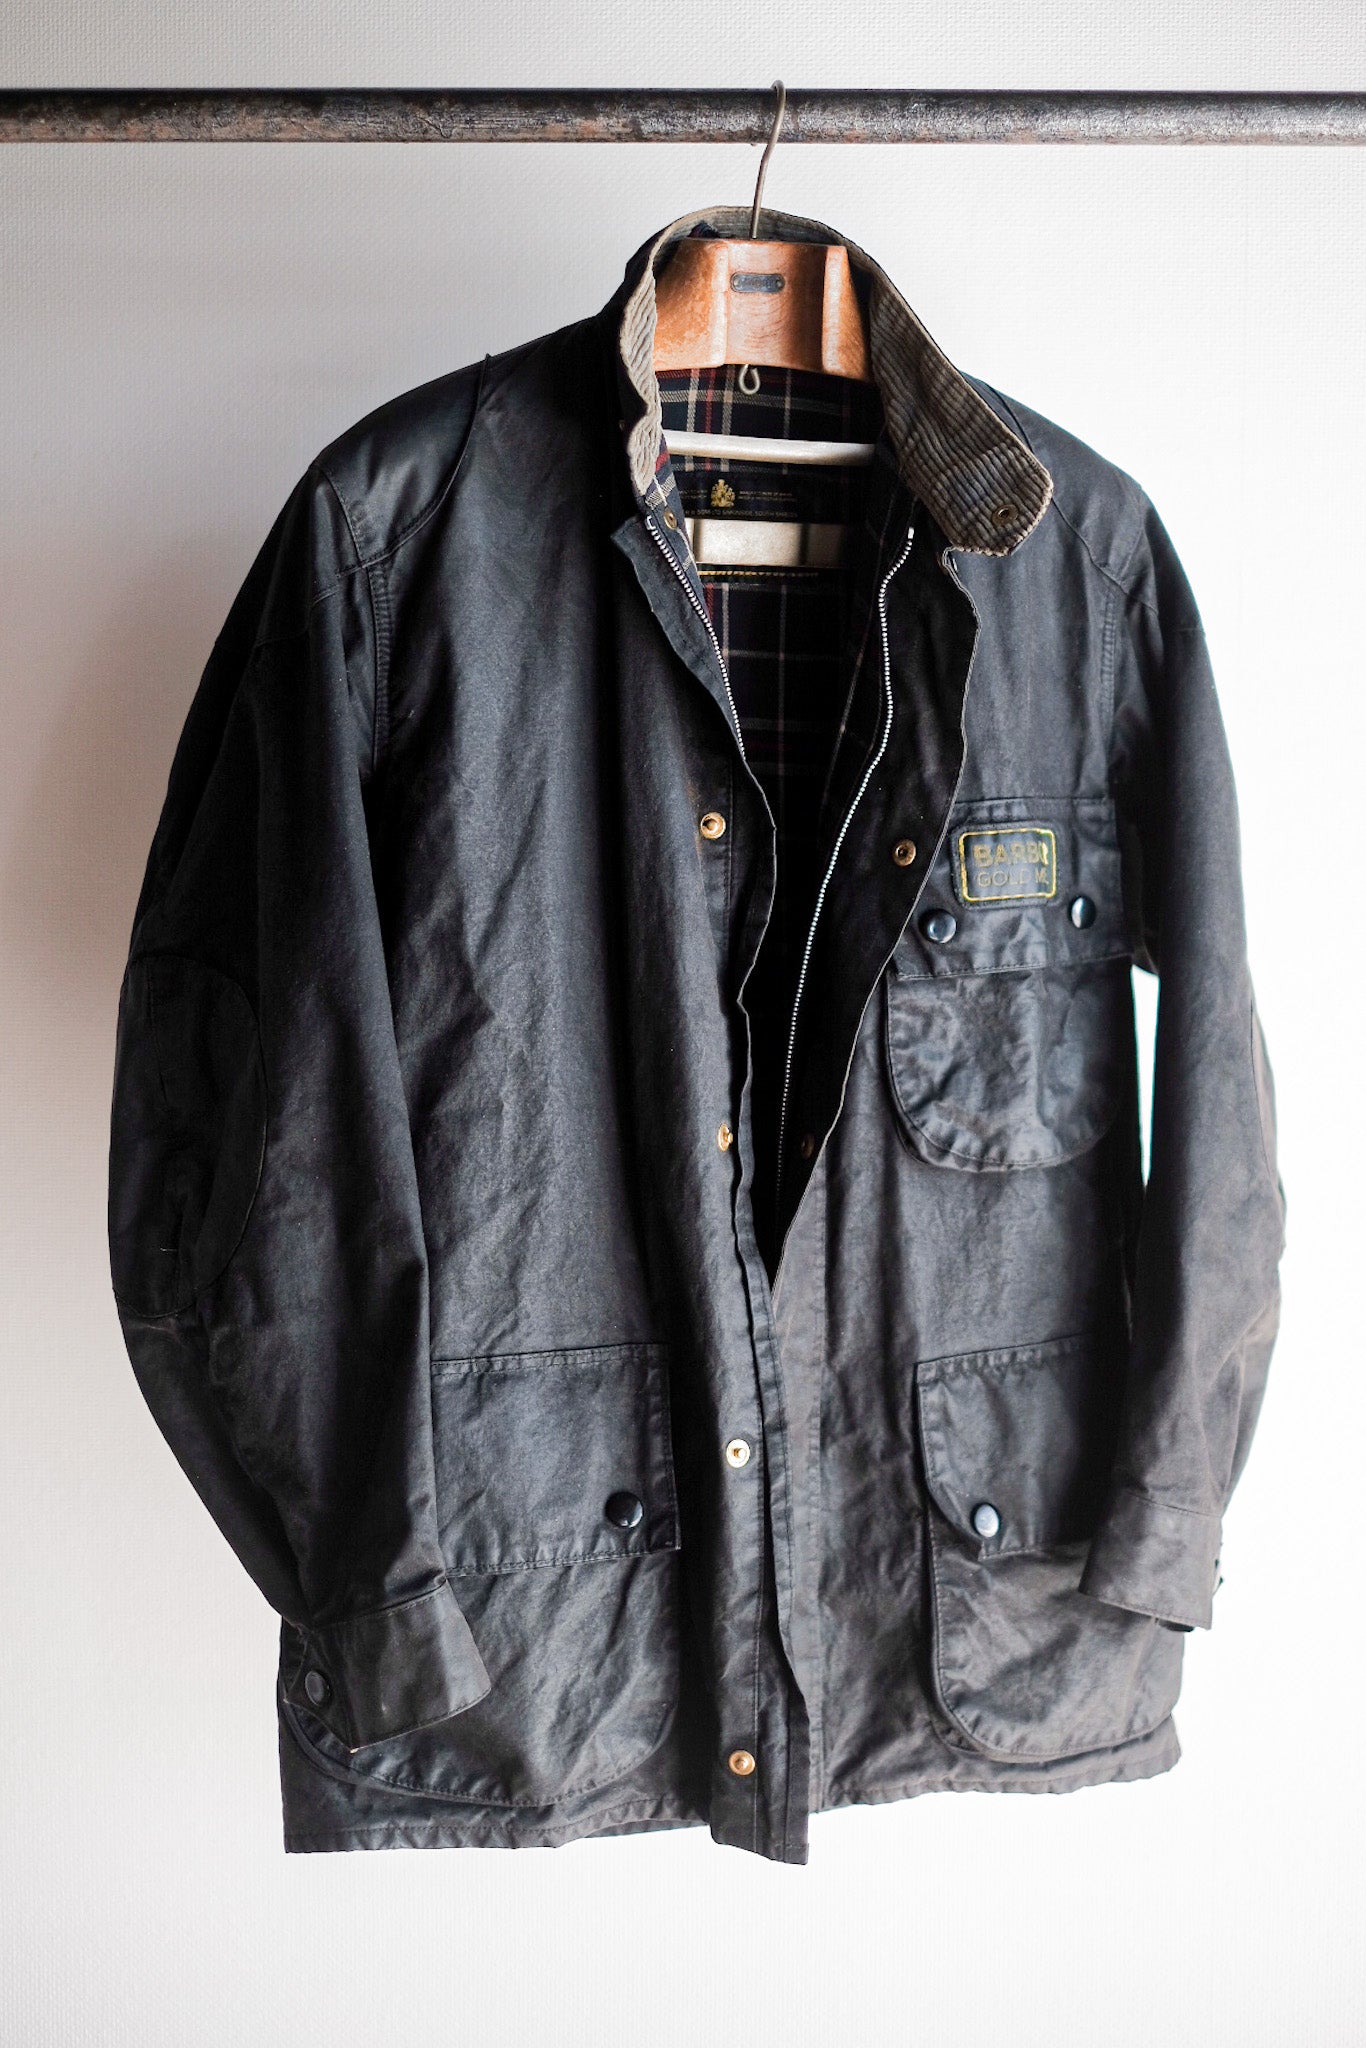 [~ 70's] Vintage Barbour Waxed Jacket "UNKNOWN MODEL" 1 CREST